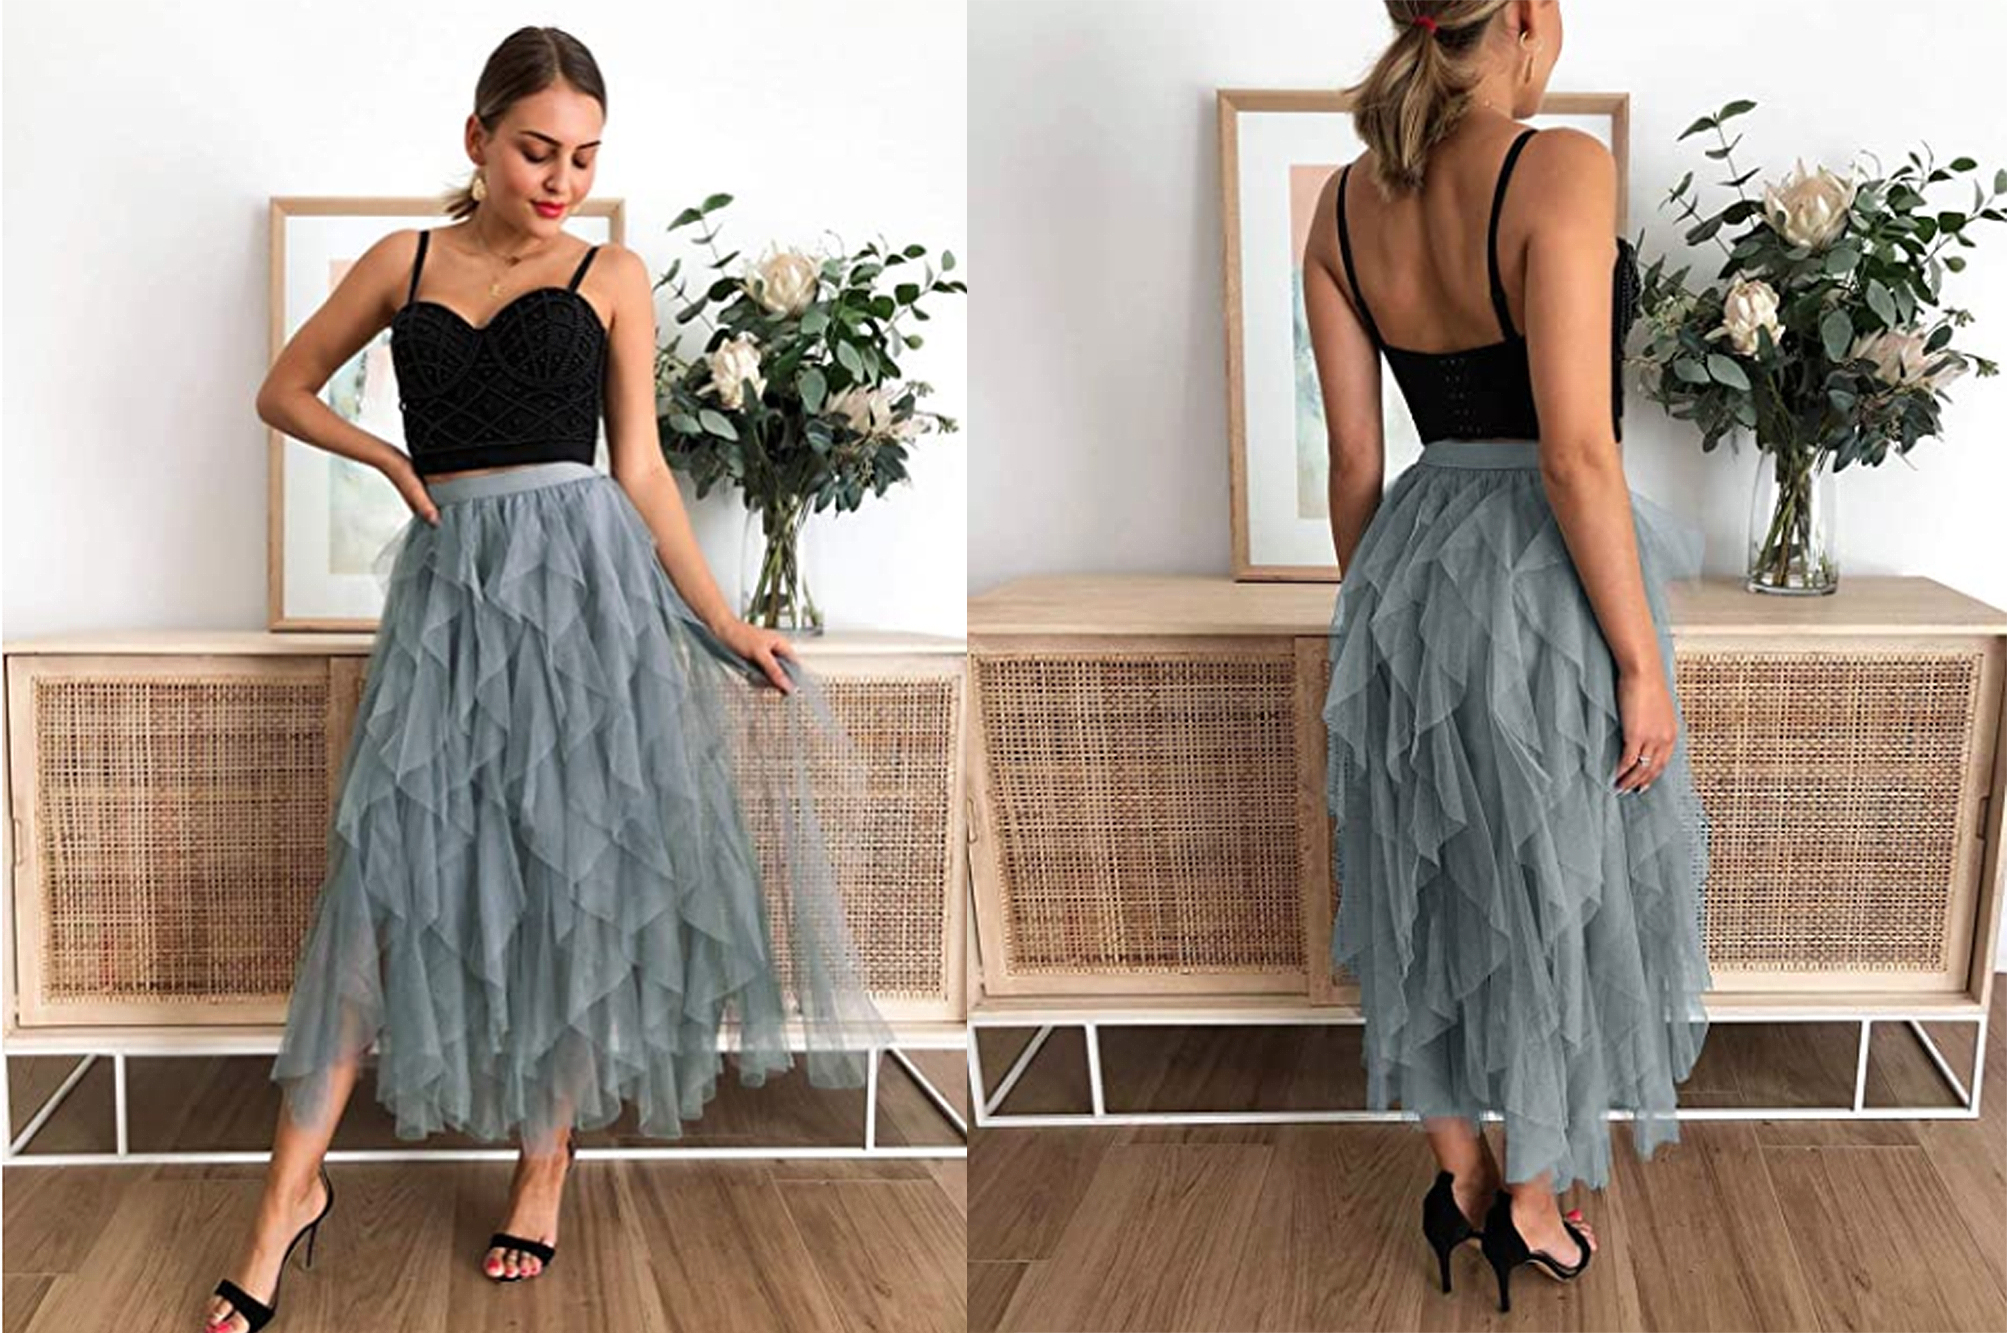 30+ Style Collaboration: The Tutu – Grown and Curvy Woman